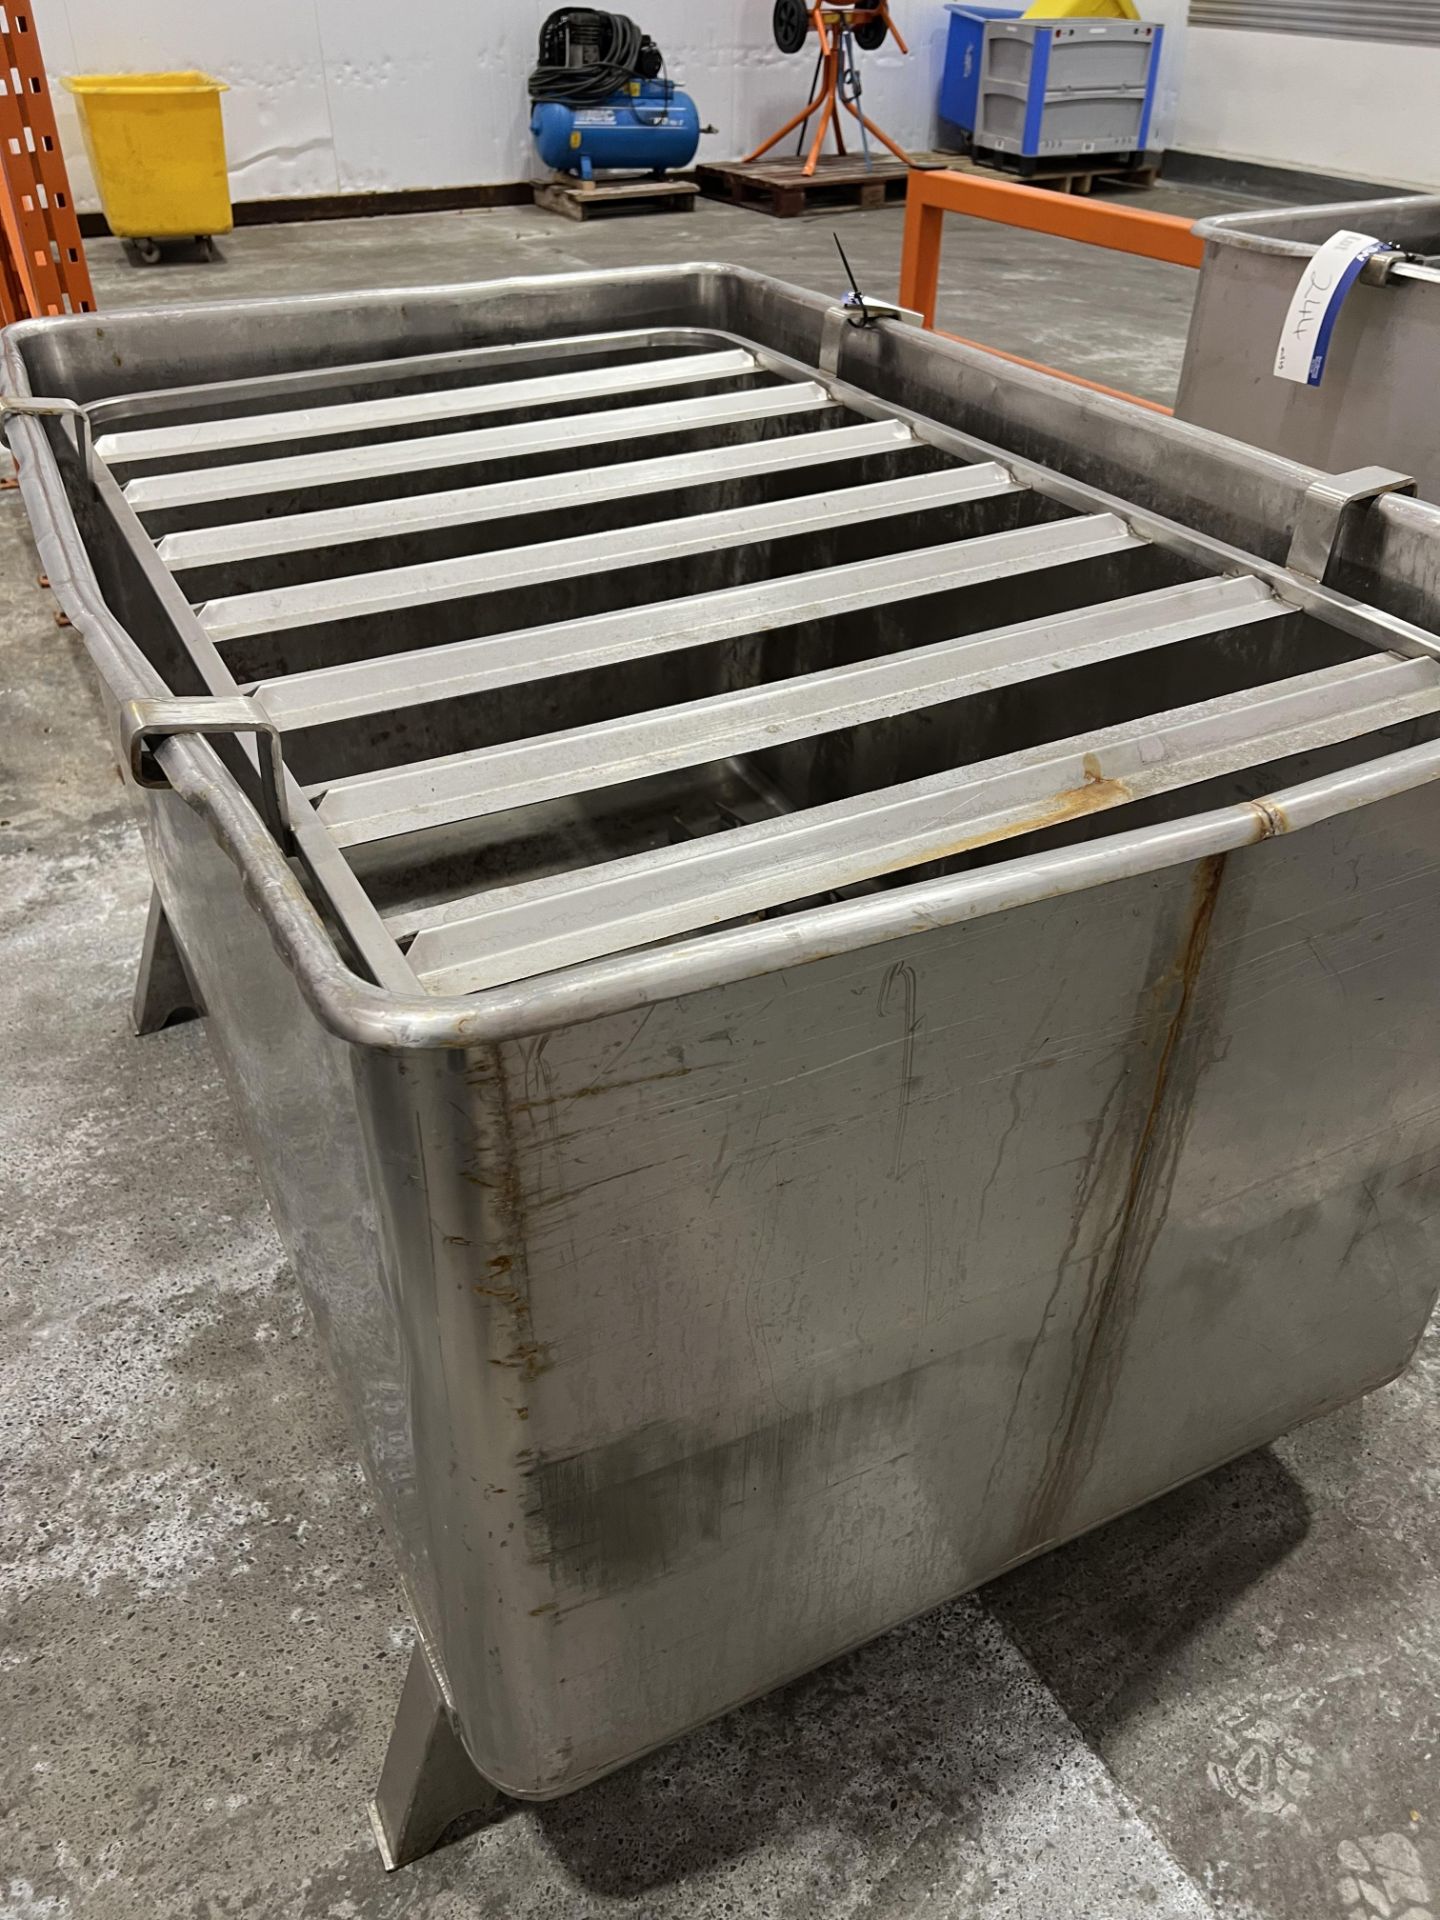 Stainless Tank, with bottom outlet, approx. 1.5m x 1m x 0.9m high, with slatted frame on top - Image 2 of 2